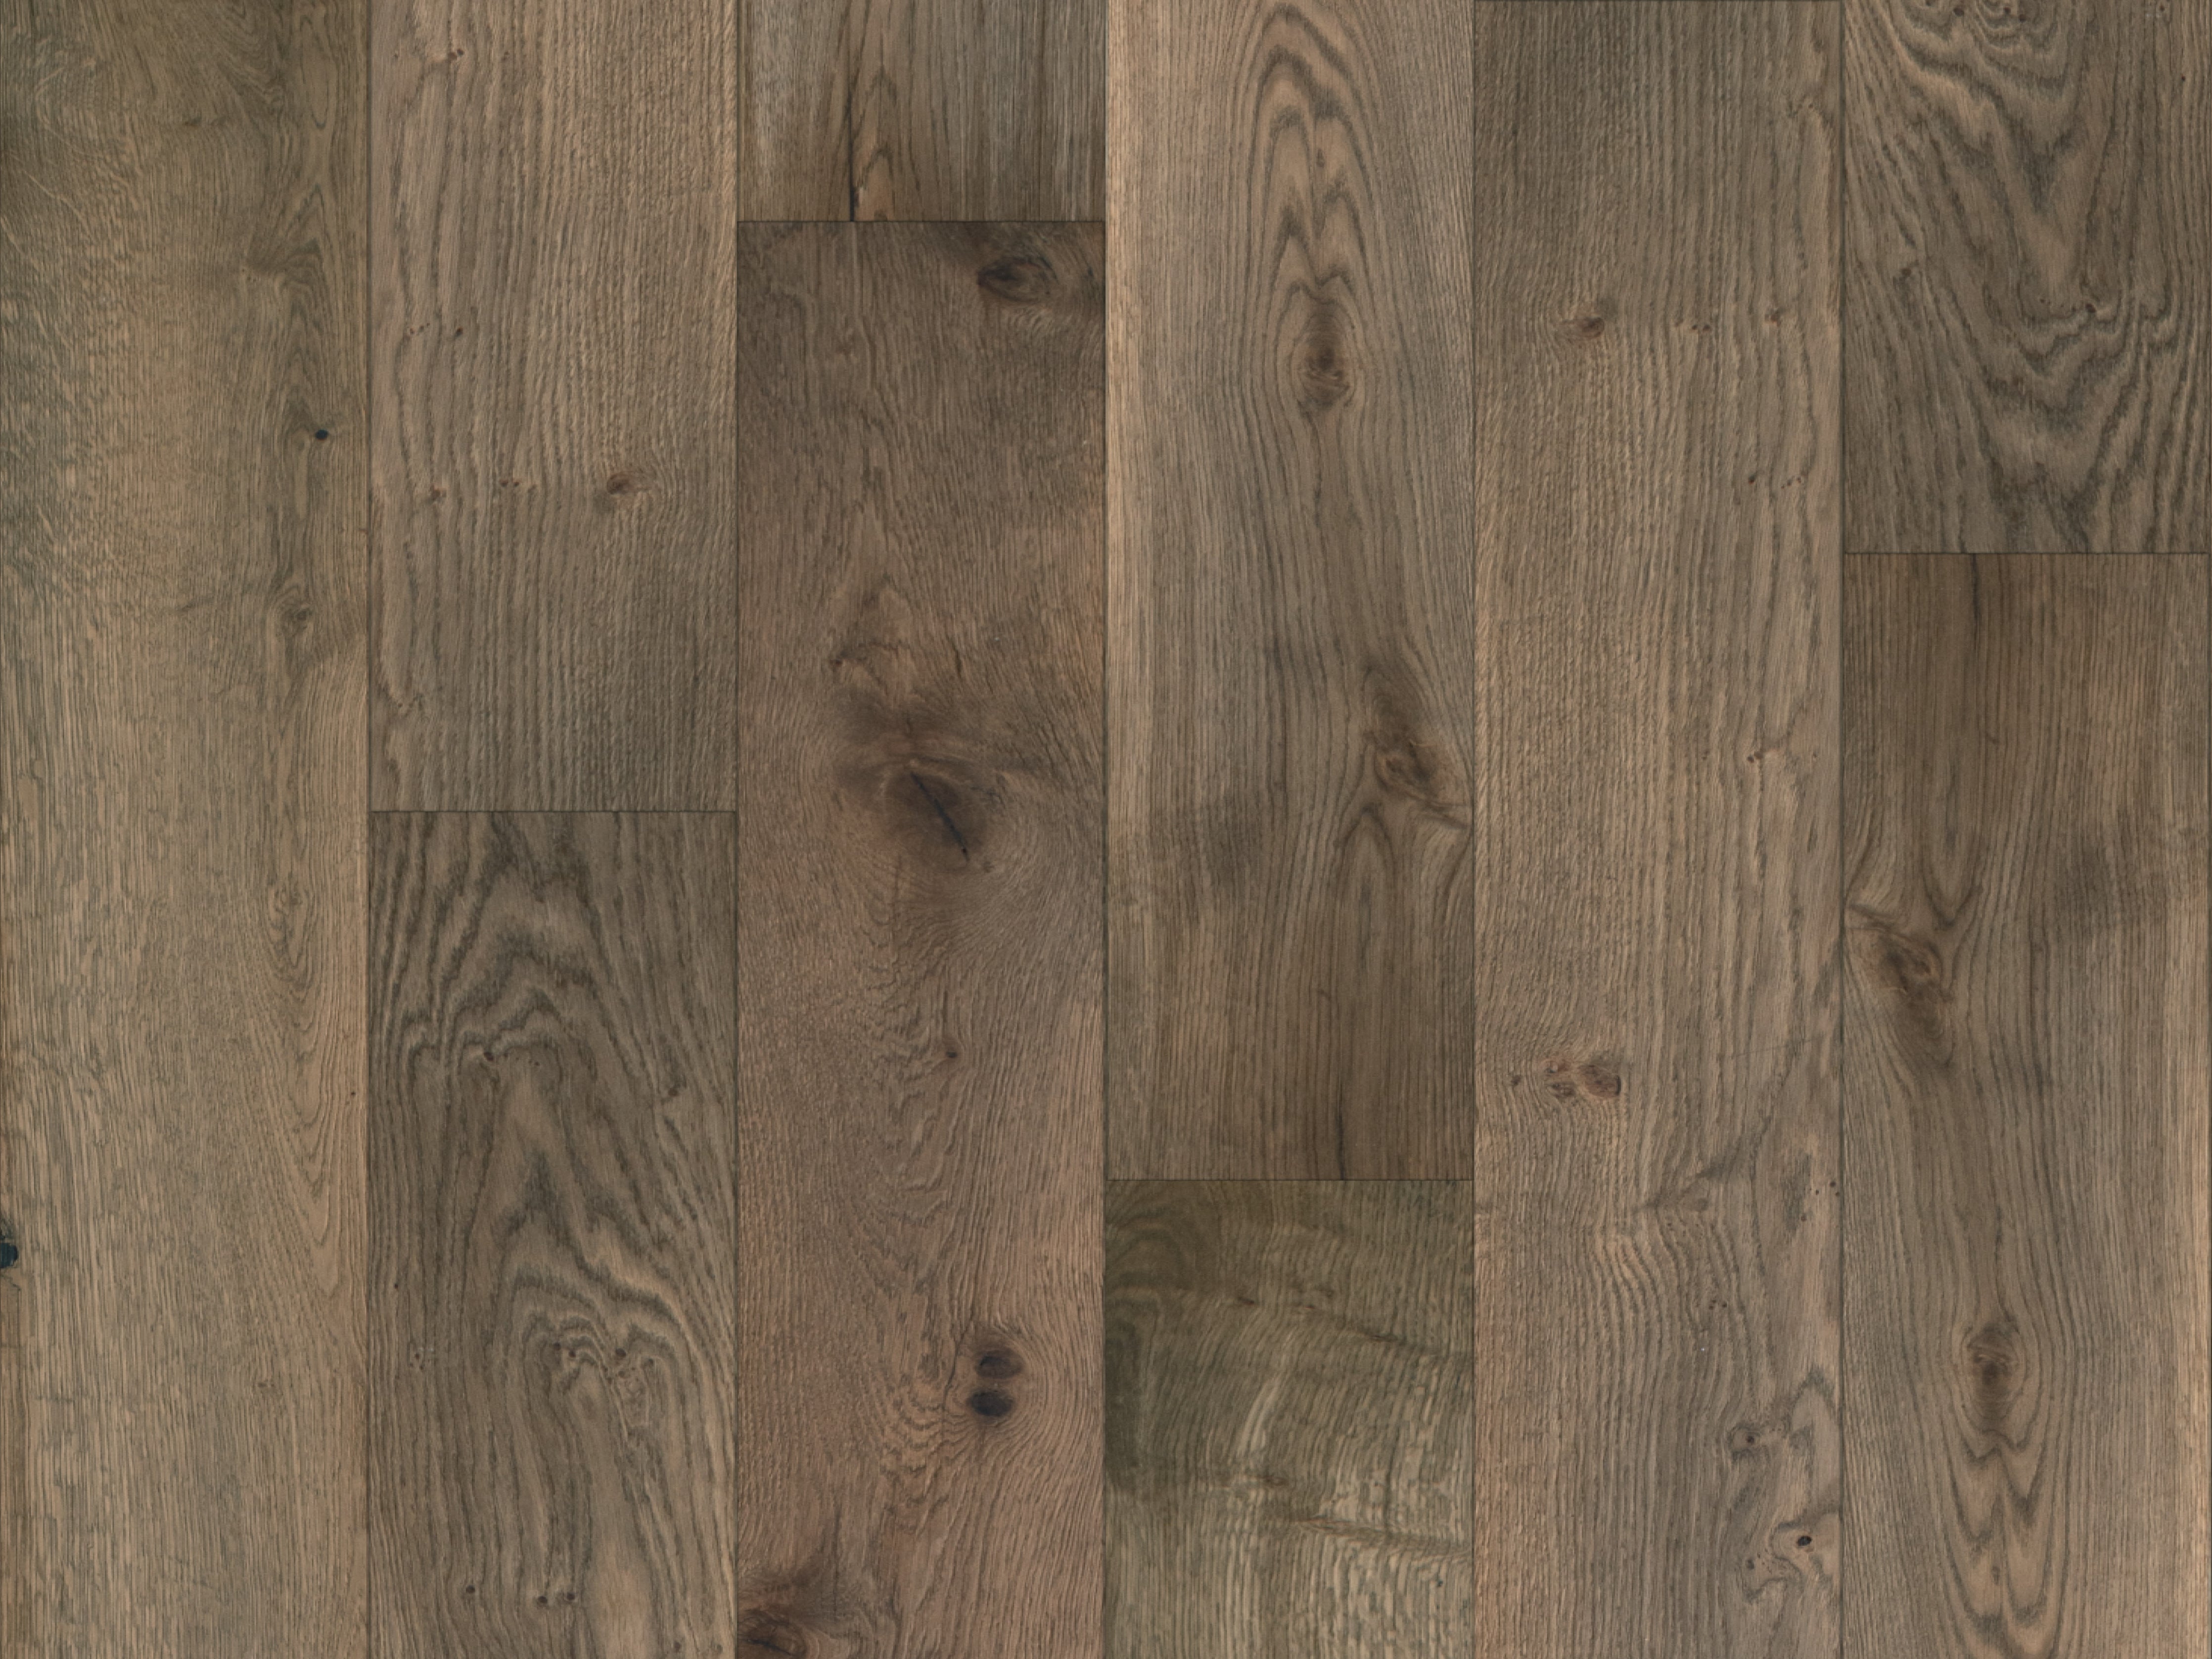 duchateau the guild lineage everly european oak engineered hardnatural wood floor uv lacquer finish for interior use distributed by surface group international